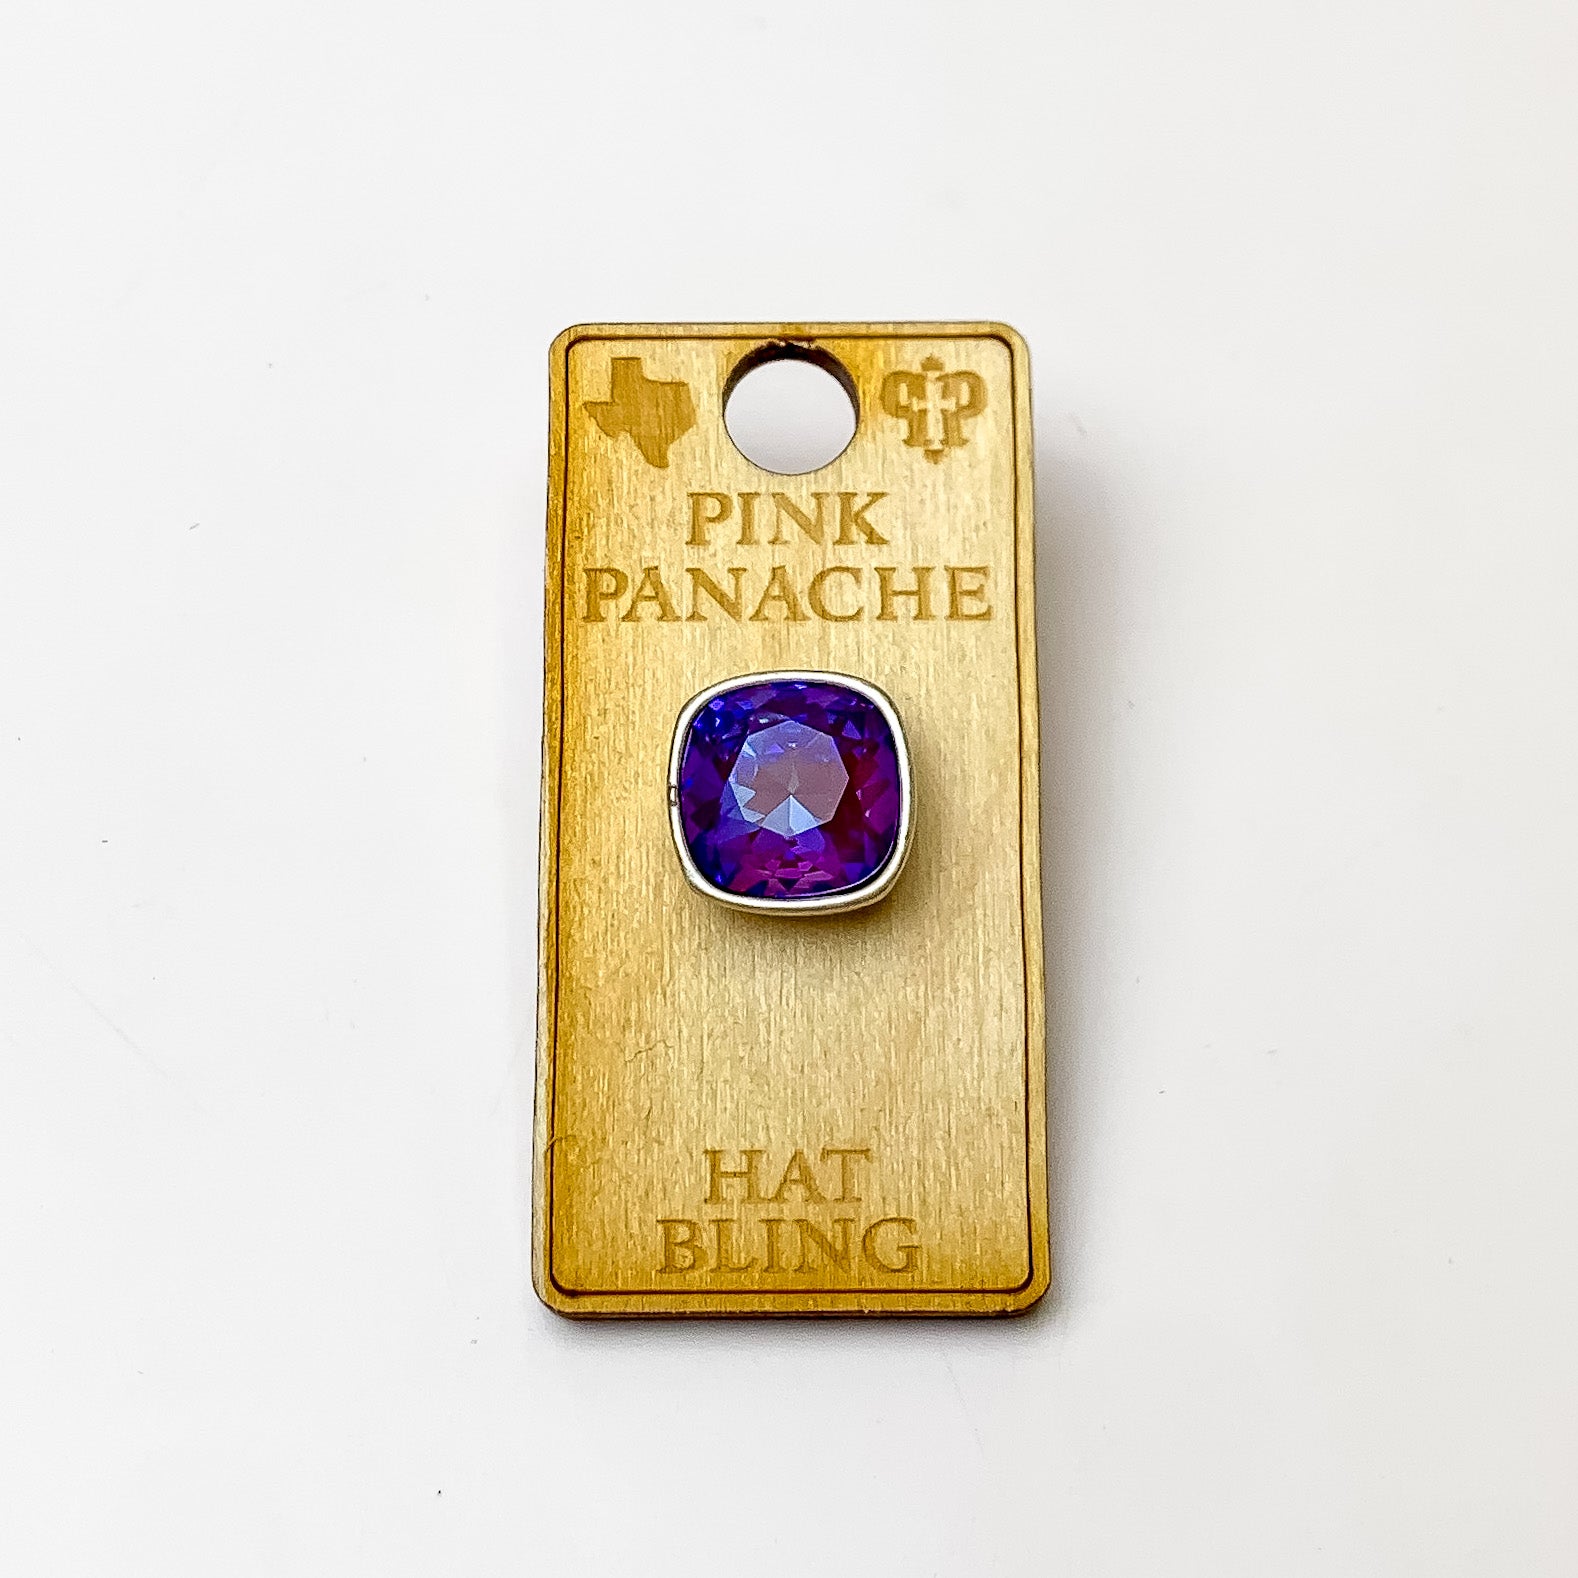 Silver, square hat pin with a burgundy delight cushion cut crystal. This hat pin is pictured on a wooden Pink Panache holder on a white background.